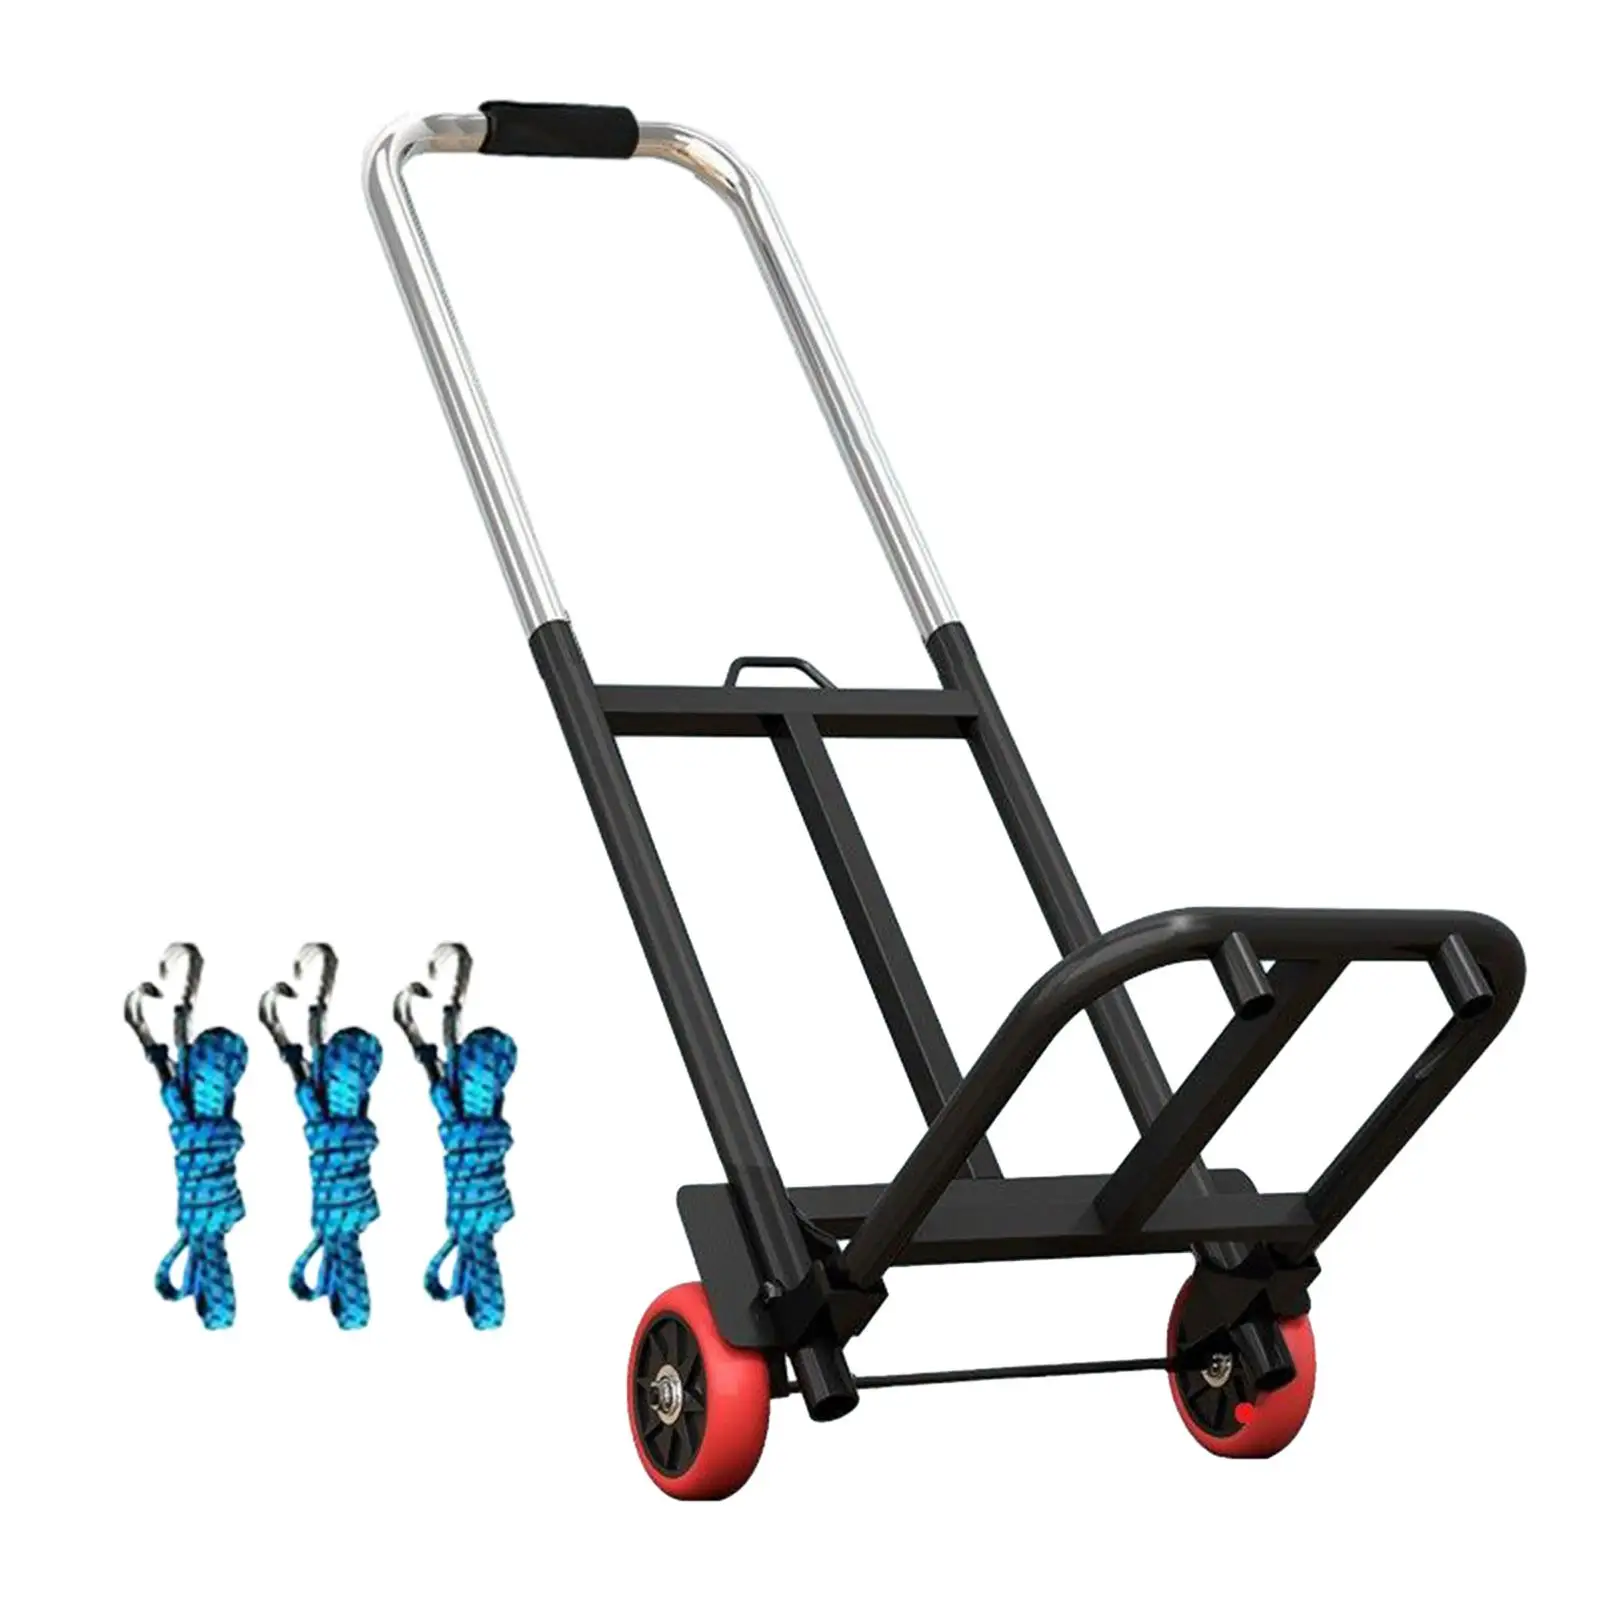 Folding Hand Truck Luggage Trolley Cart Sturdy Telescopic 50cm-80cm Telescoping Handle with 3 Elastic Ropes for Travelers